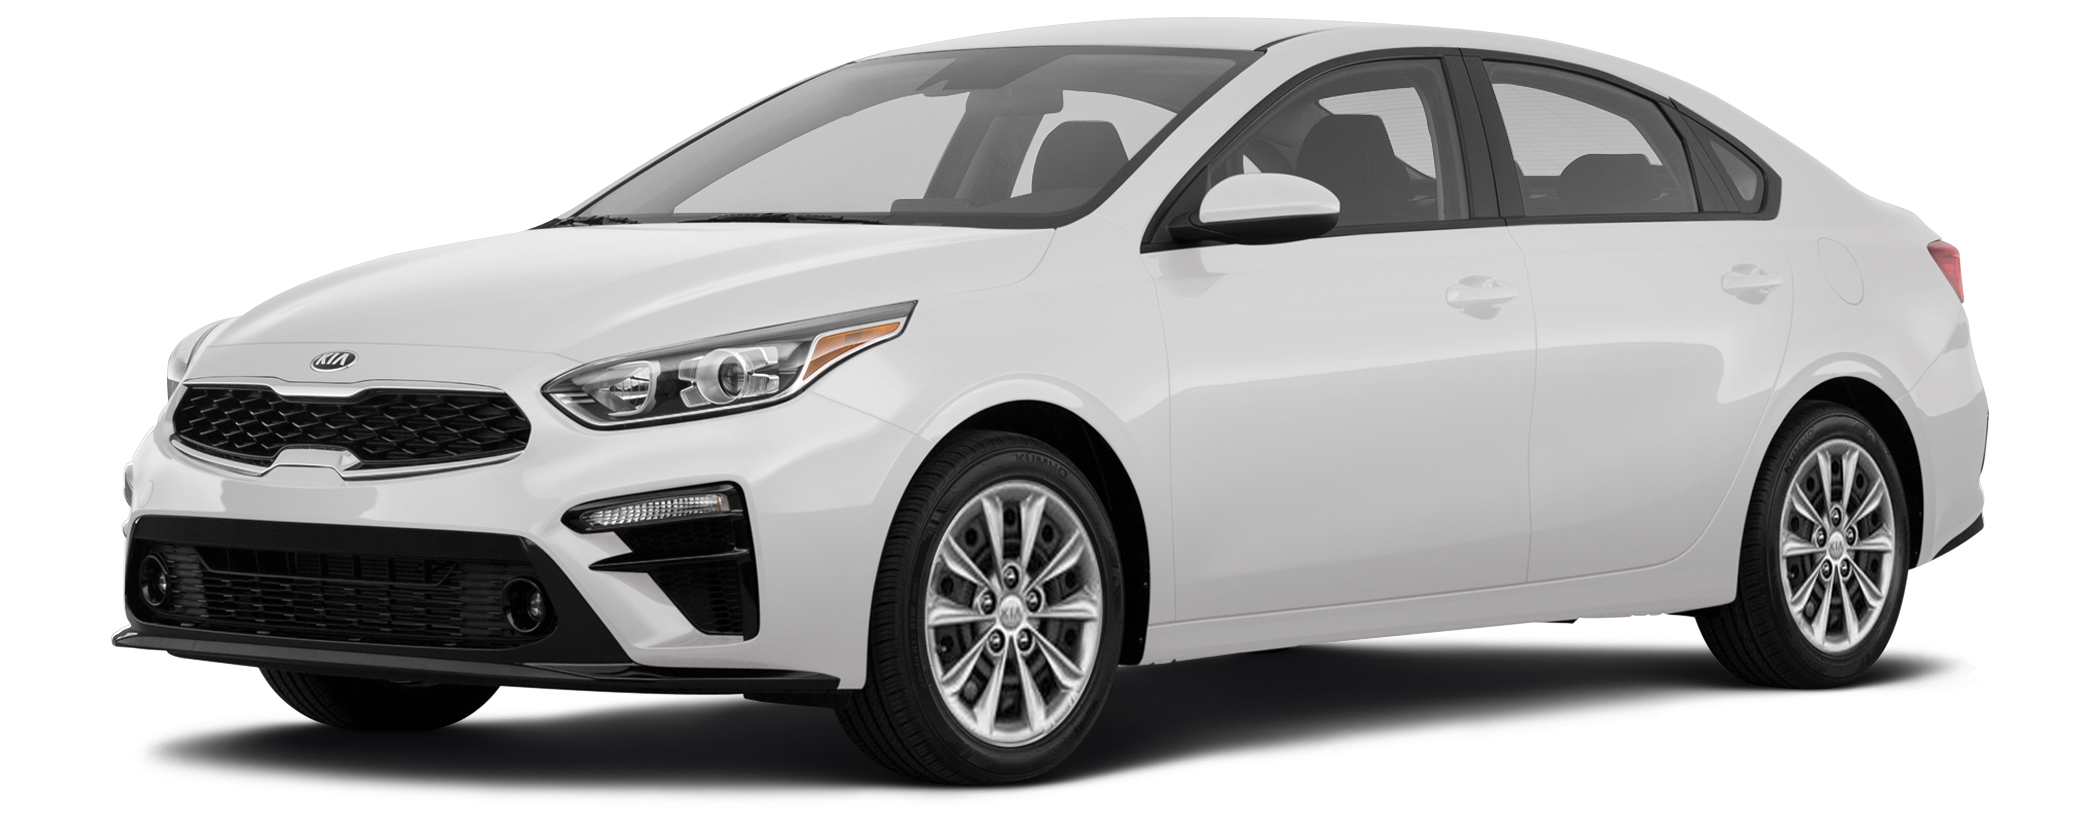 2019-kia-forte-incentives-specials-offers-in-dothan-al